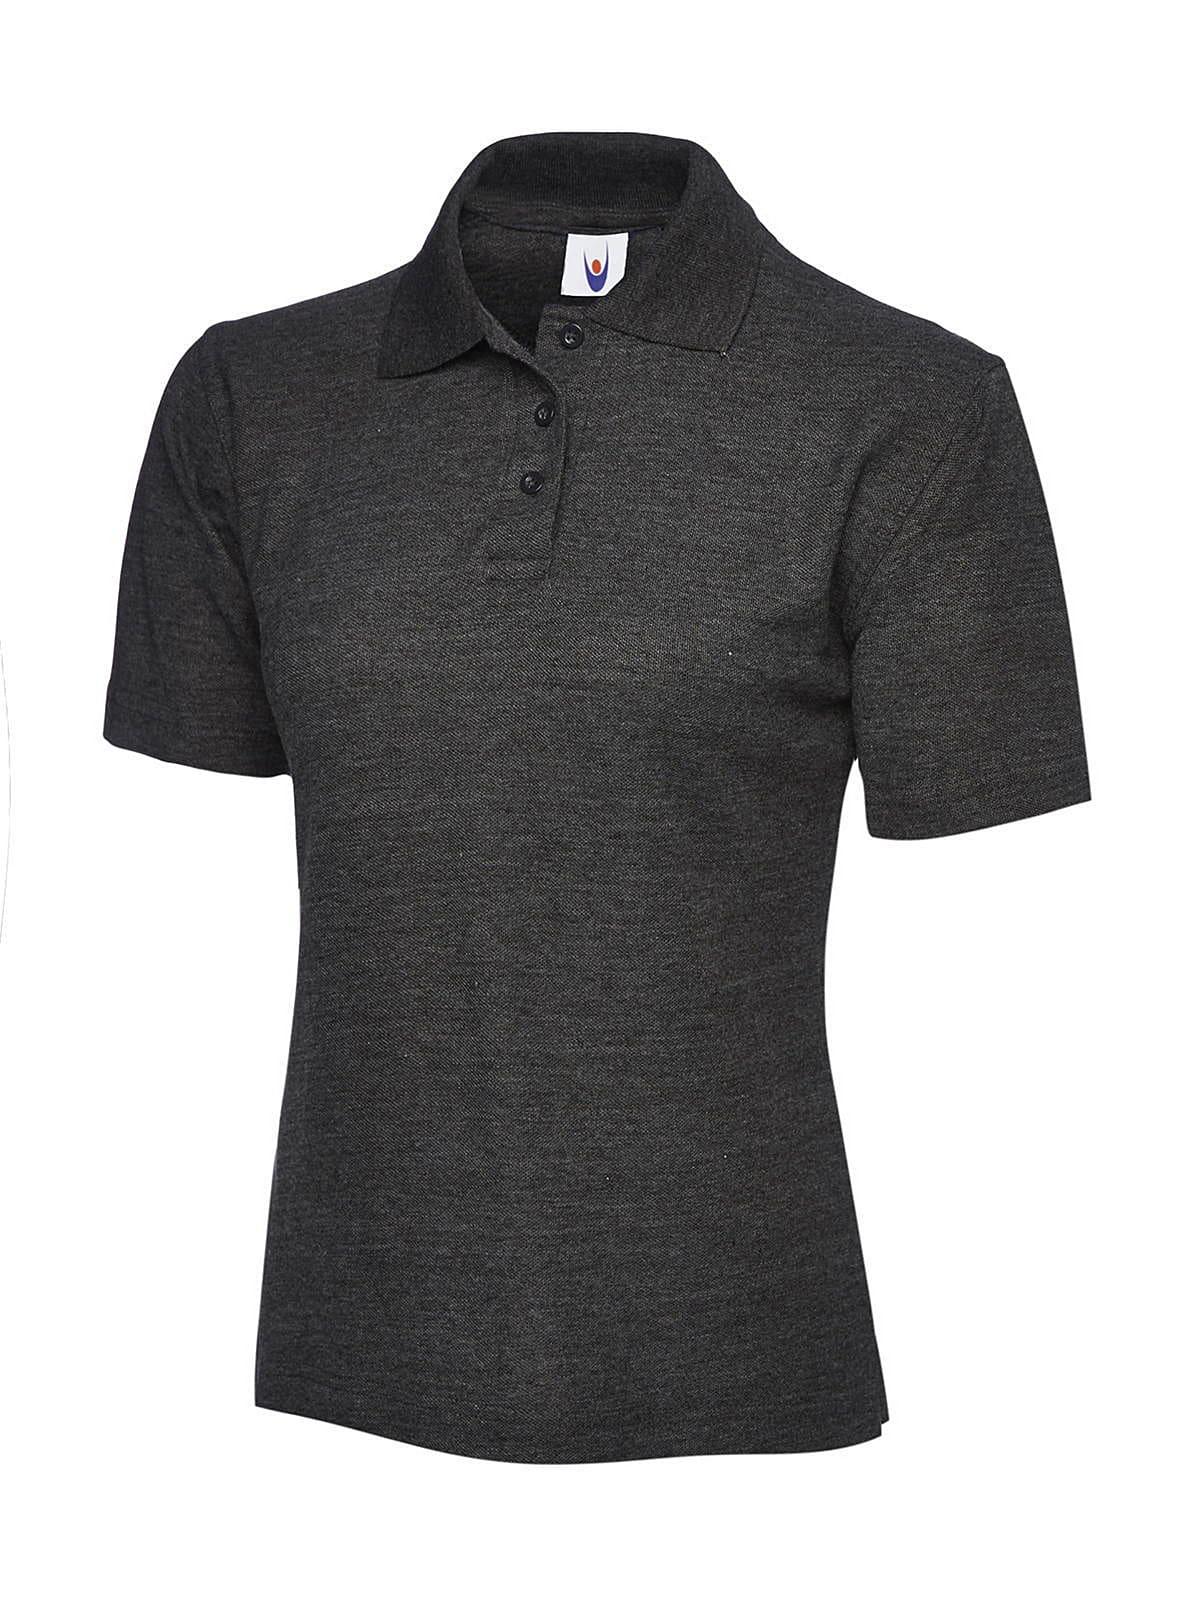 Uneek 220GSM Womens Polo Shirt in Charcoal (Product Code: UC106)